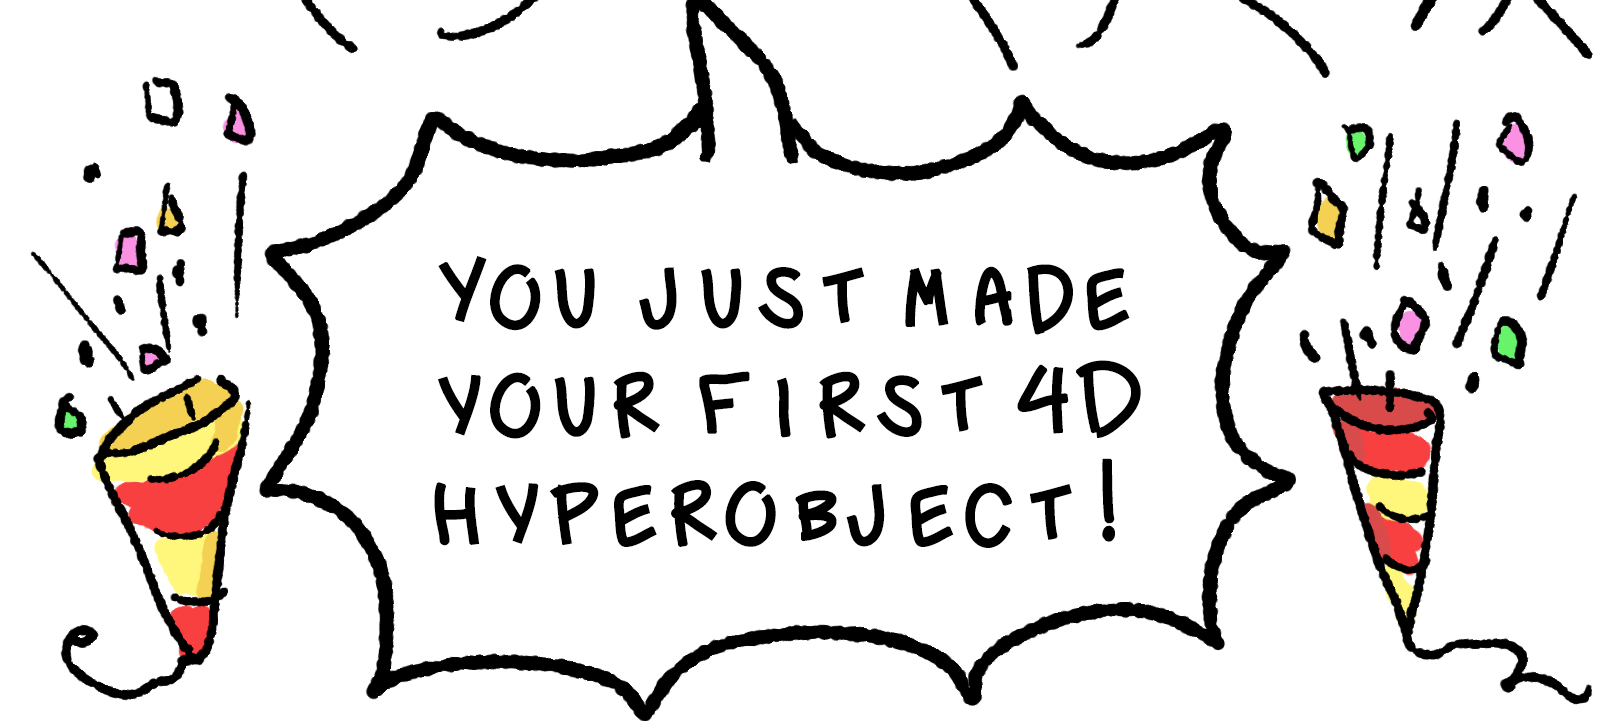 Elk takes up most of the screen, waving wide-eyed with little excitement lines beaming from his face, and he shouts: And that's it! You just made your first 4D hyper-object! On either side of this speech bubble are little party poppers shooting rainbow confetti.